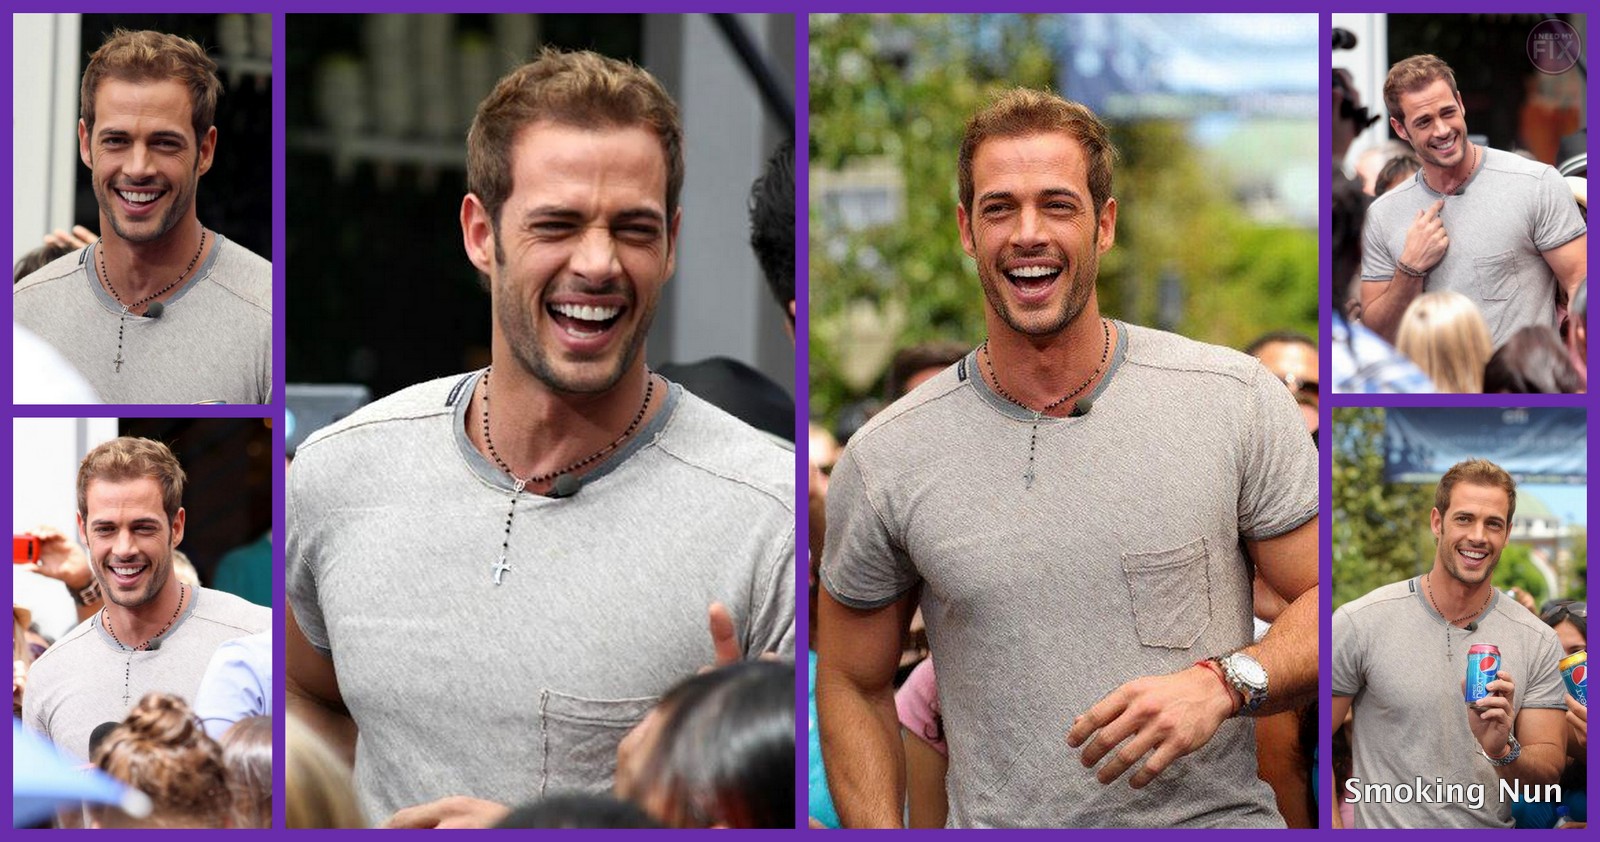 William Levy Ultimate Fans: William Levy's Billion-Dollar Smile.